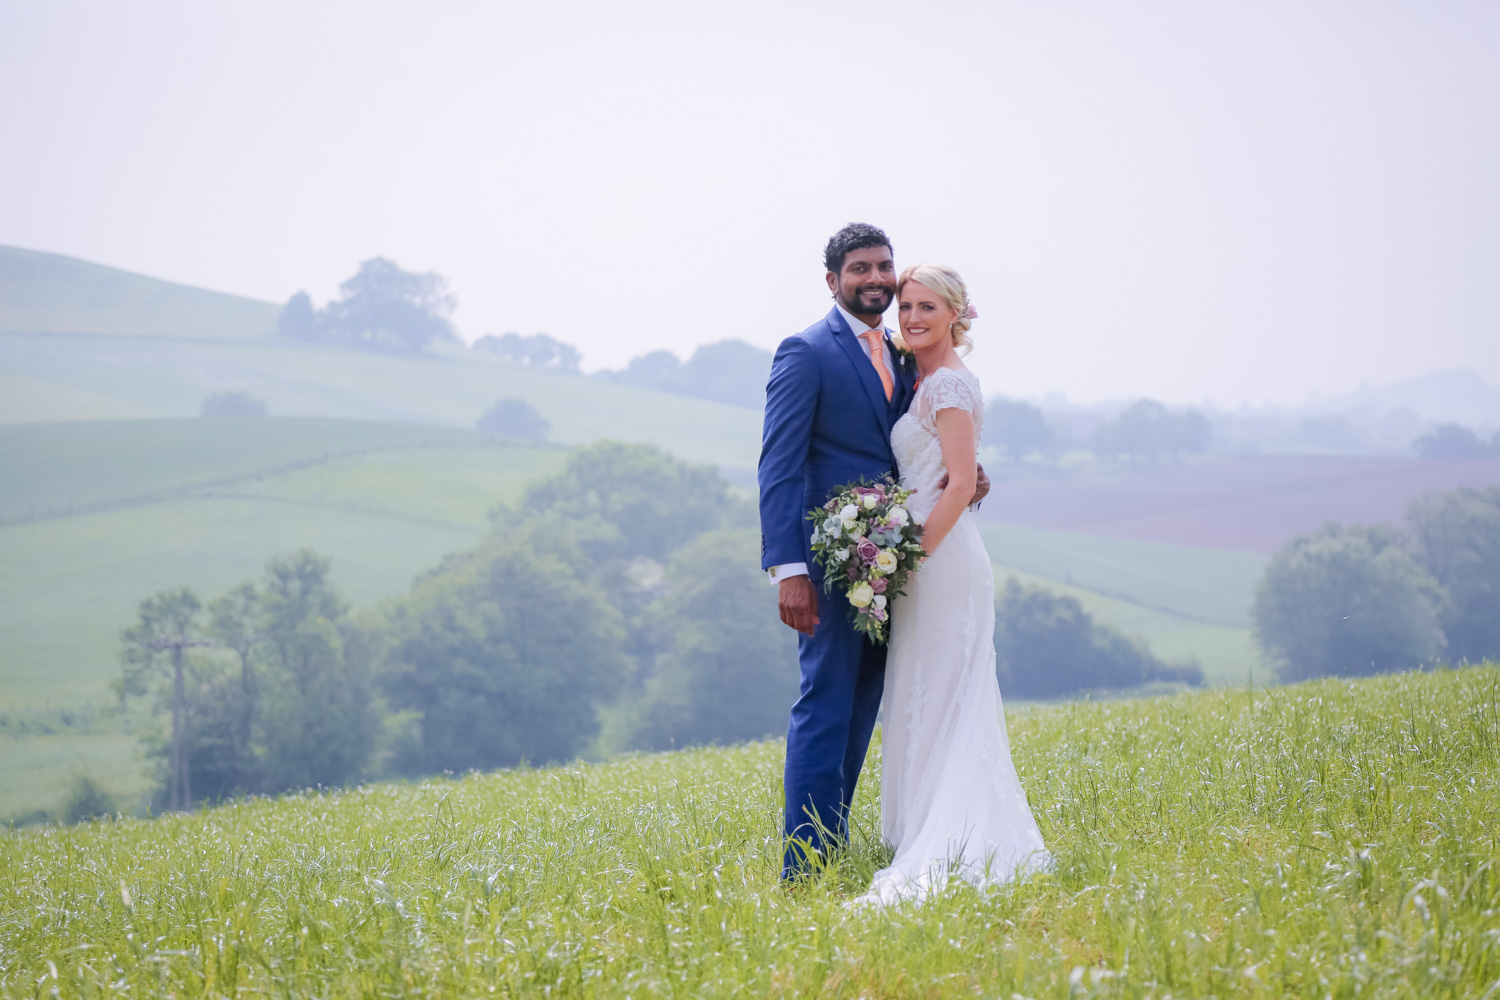 Priston mill wedding photography by Hannah Timm